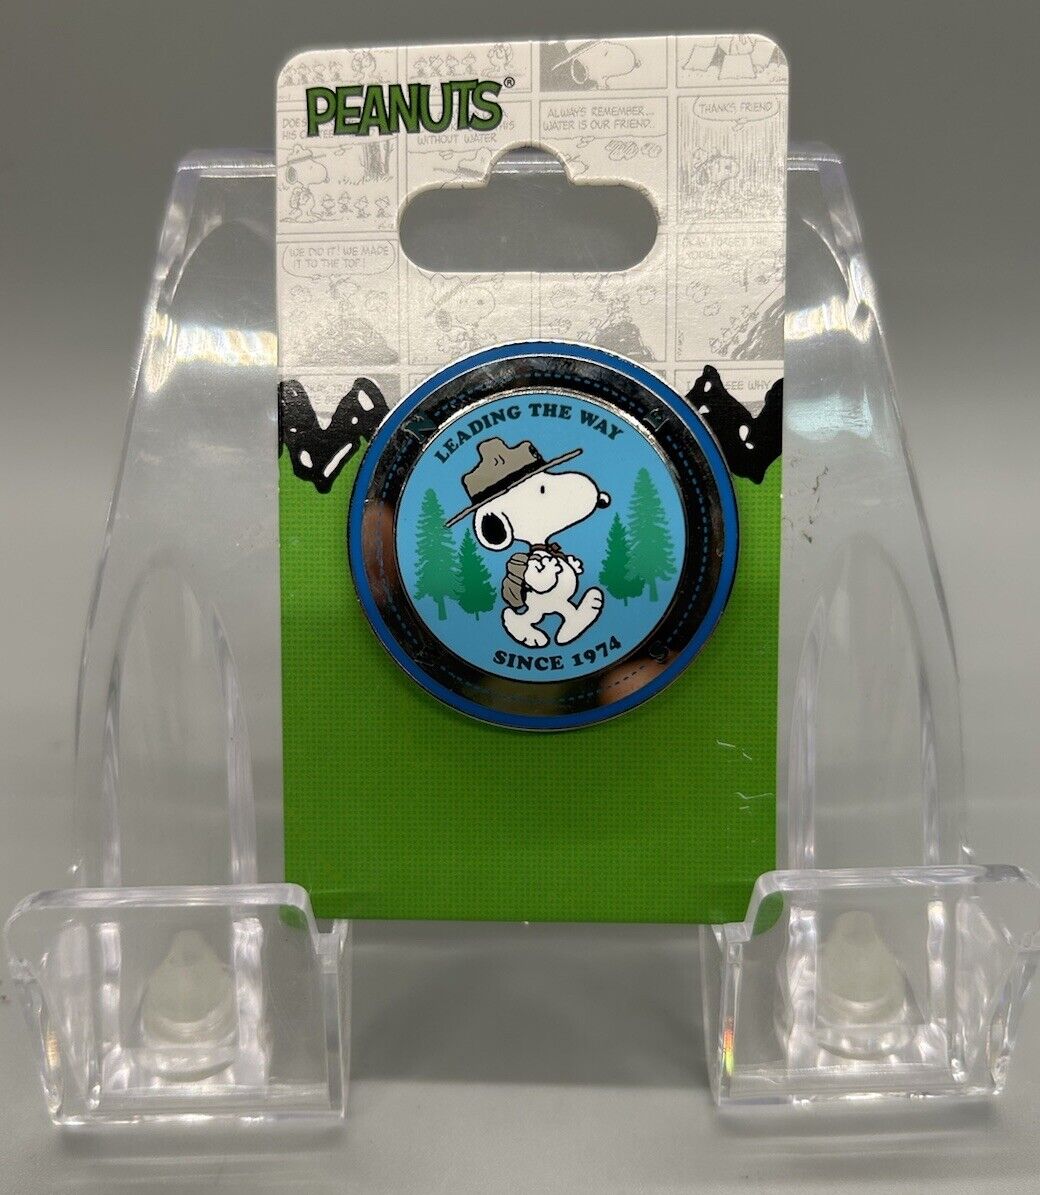 Peanuts/Snoopy Beagle Scout Compass Pin From Knotts Berry Farm.